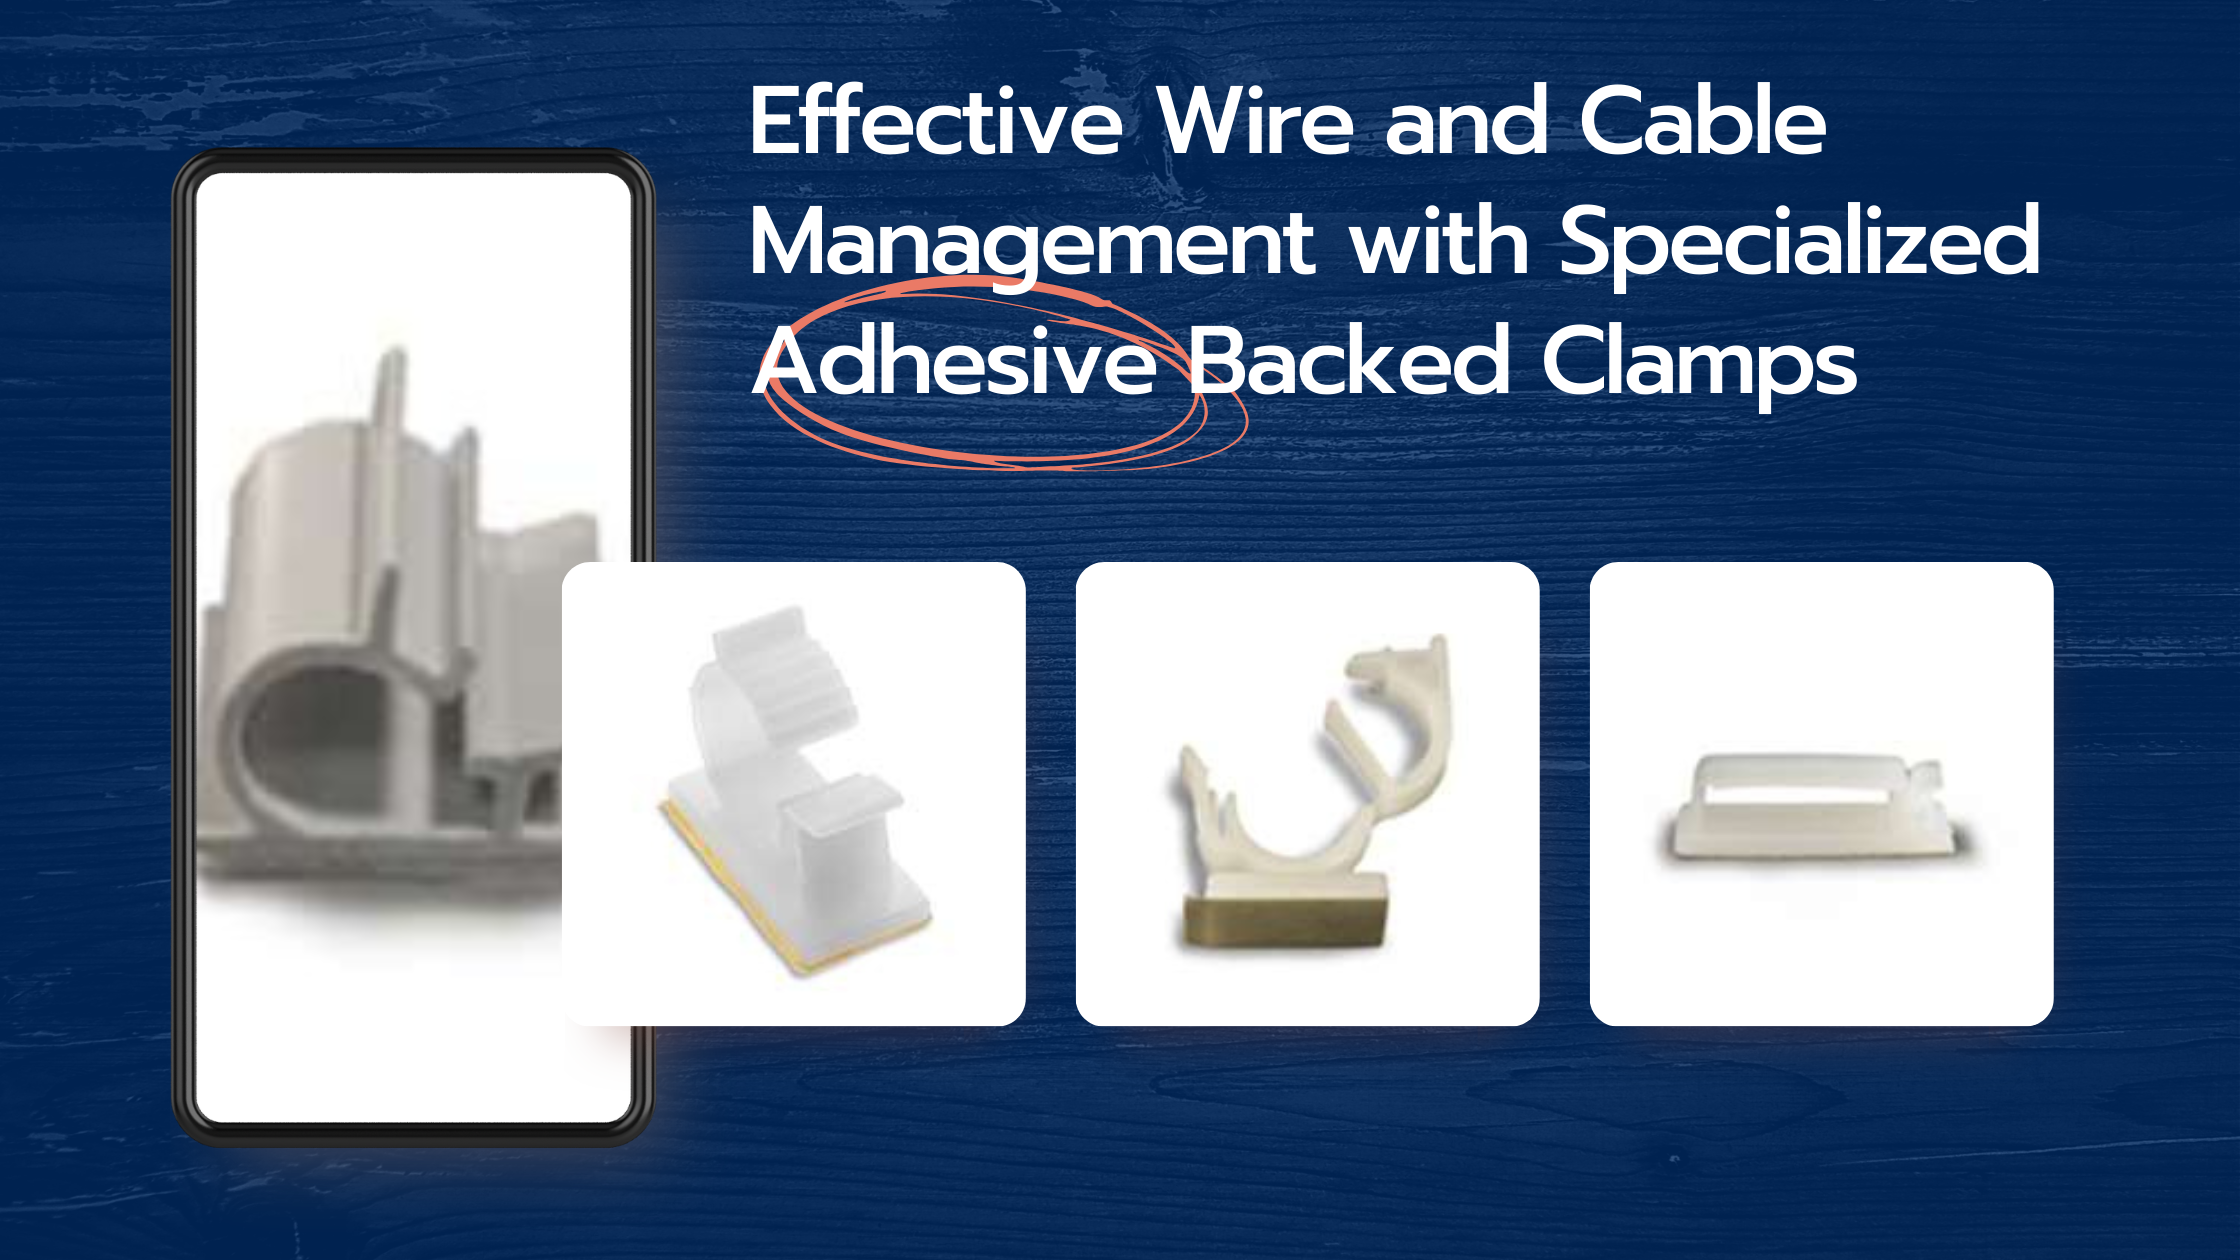 Specialized Adhesive Backed Clamps for Effective Wire and Cable Management